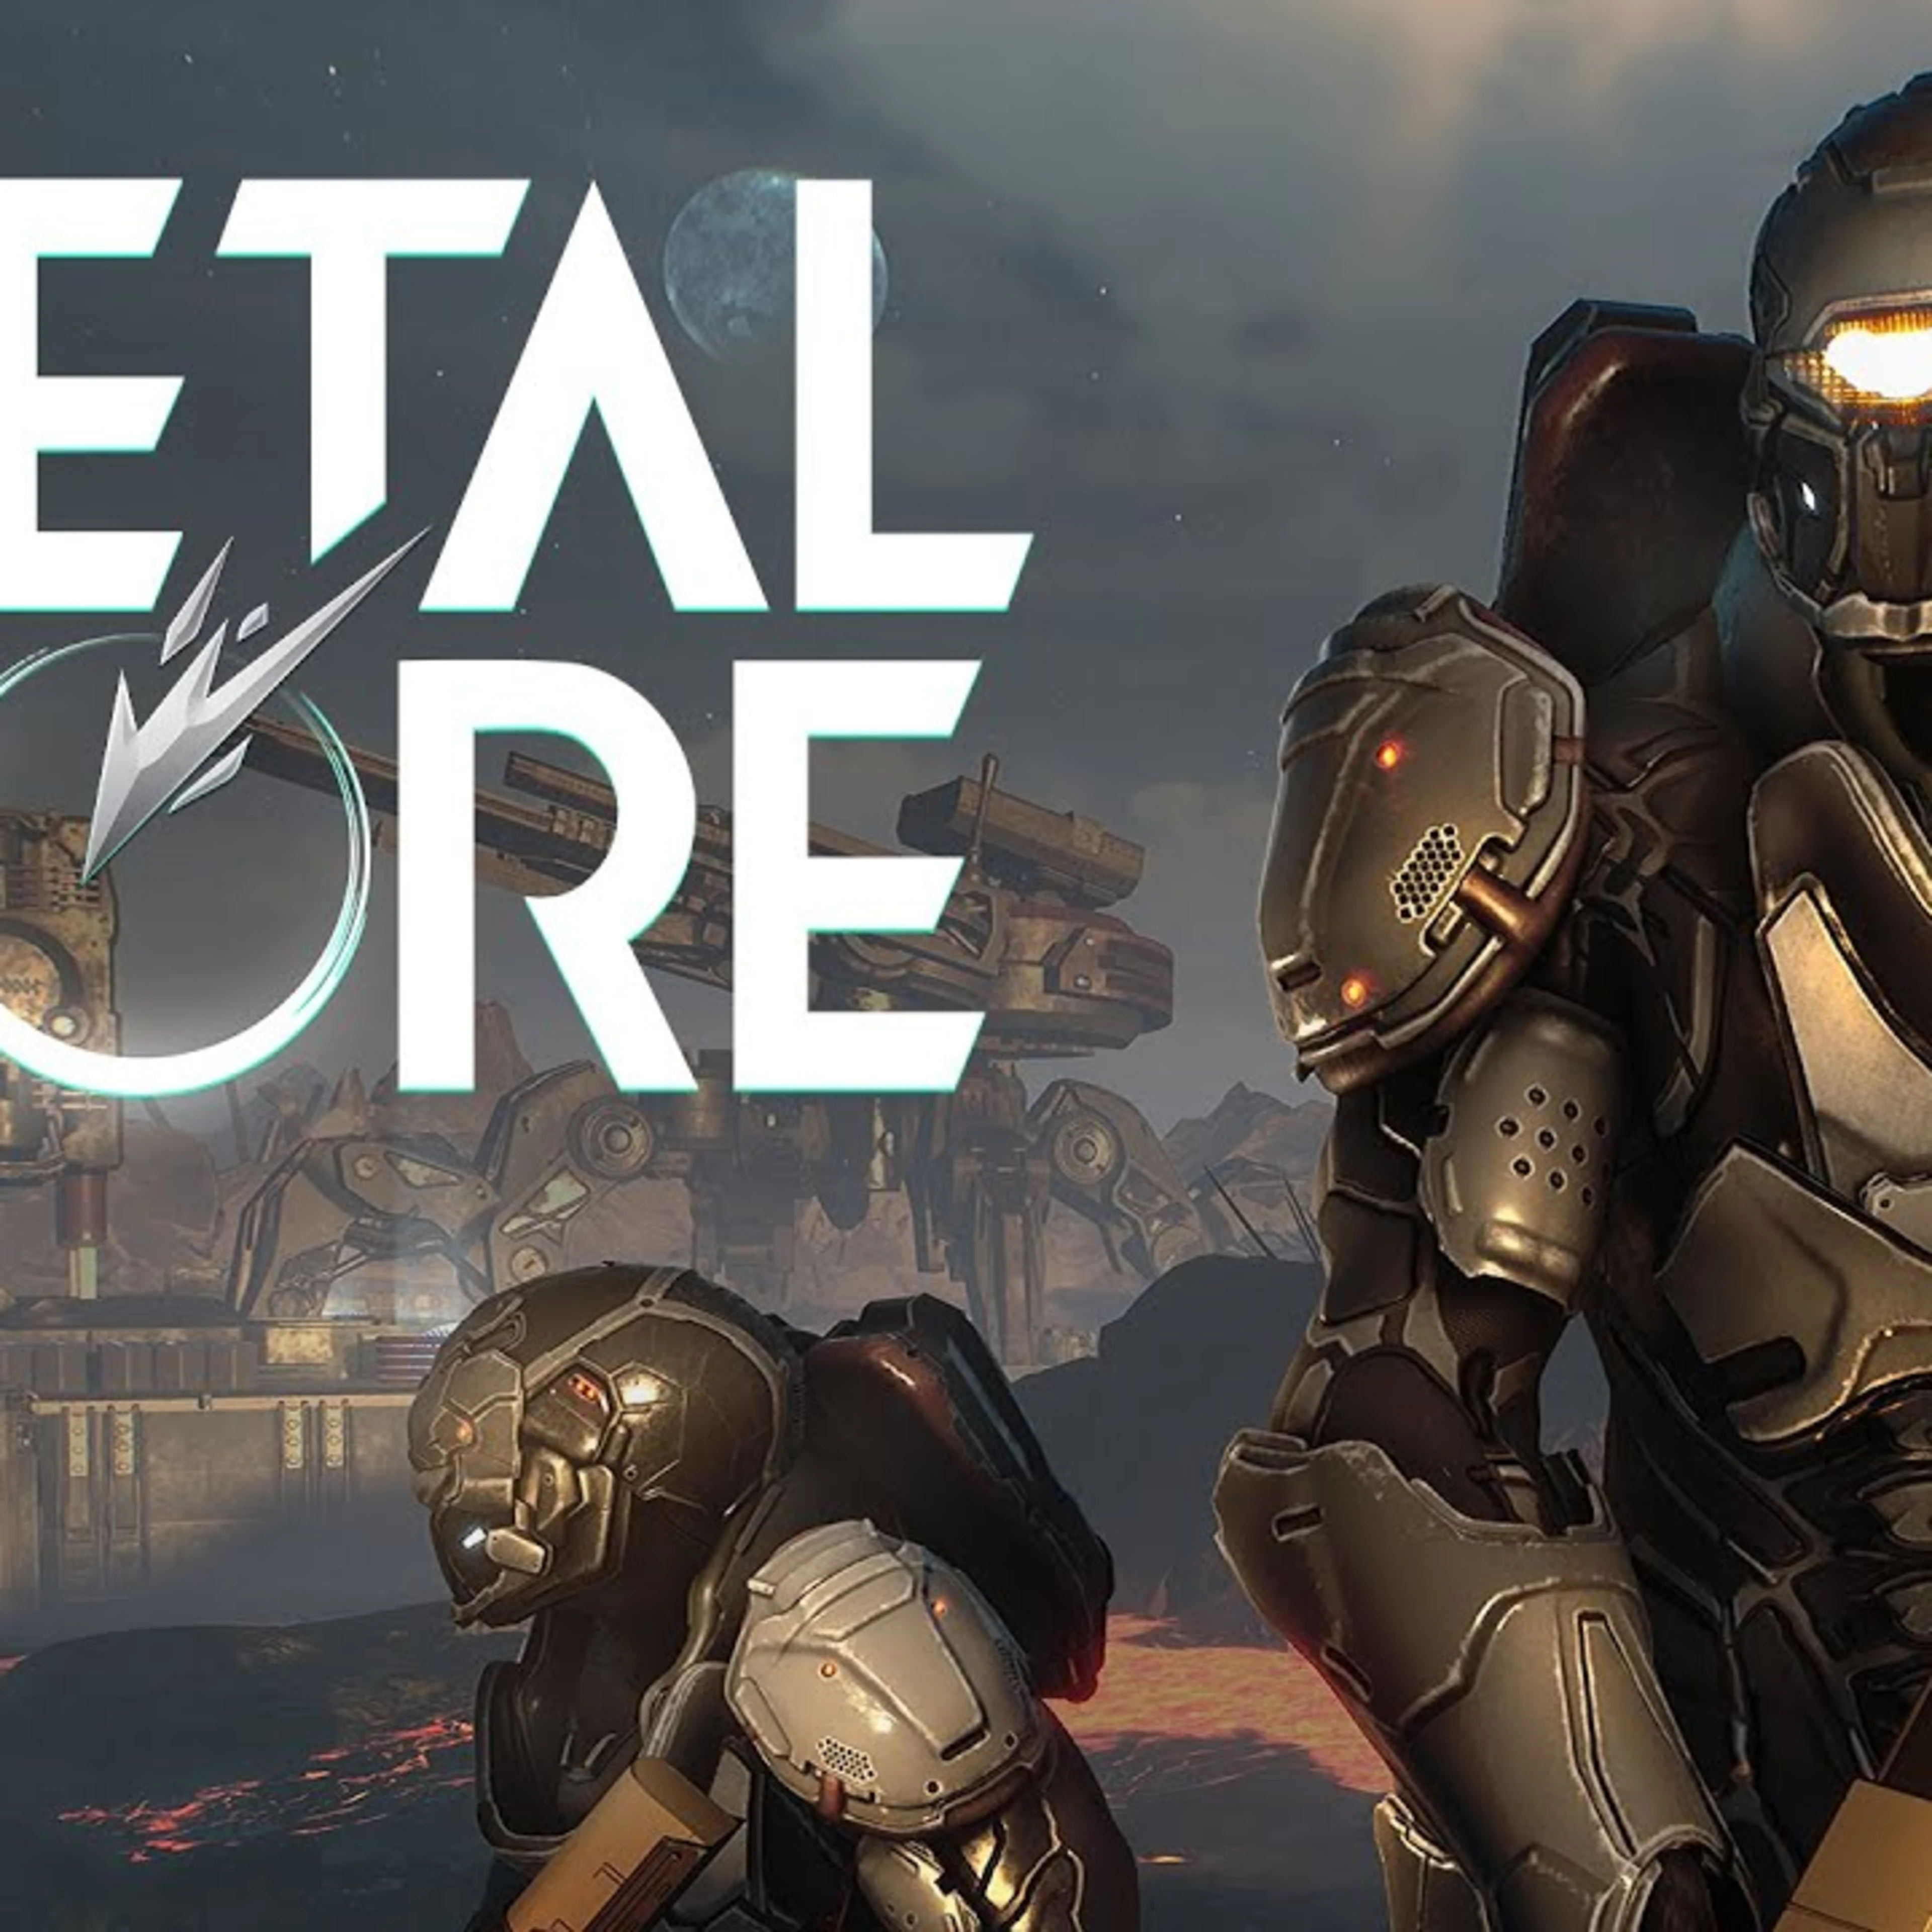 MetalCore's "Call to Arms" Closed Beta Launch Announced